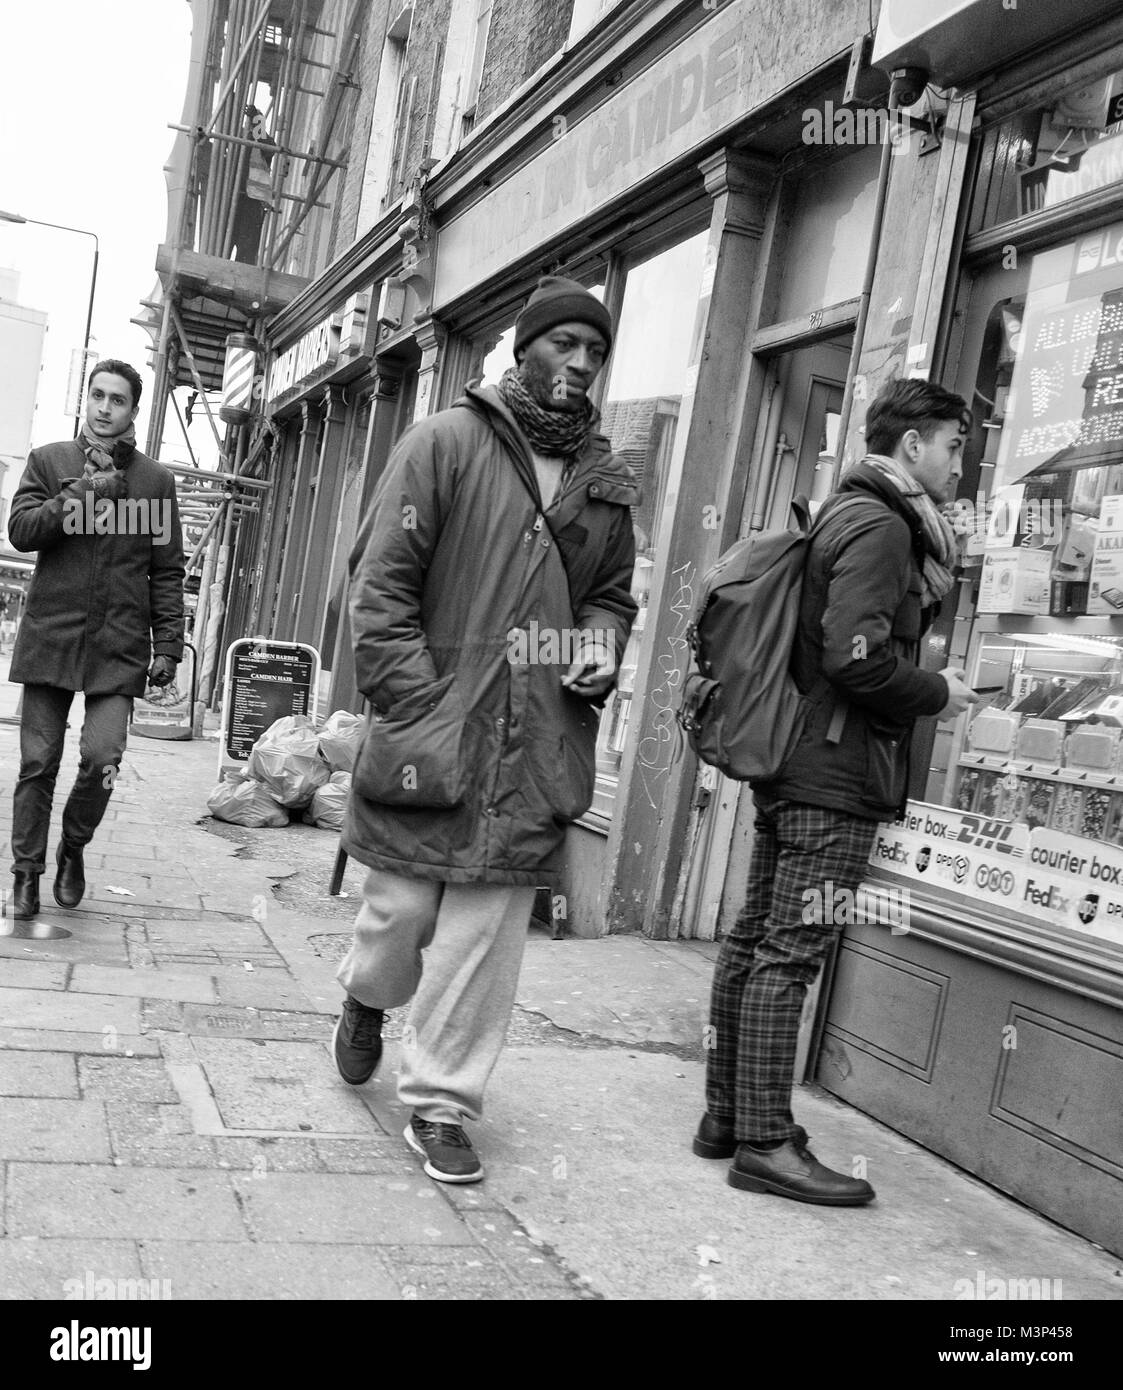 Black & White Photograph of Street Life in Camden, North London ...